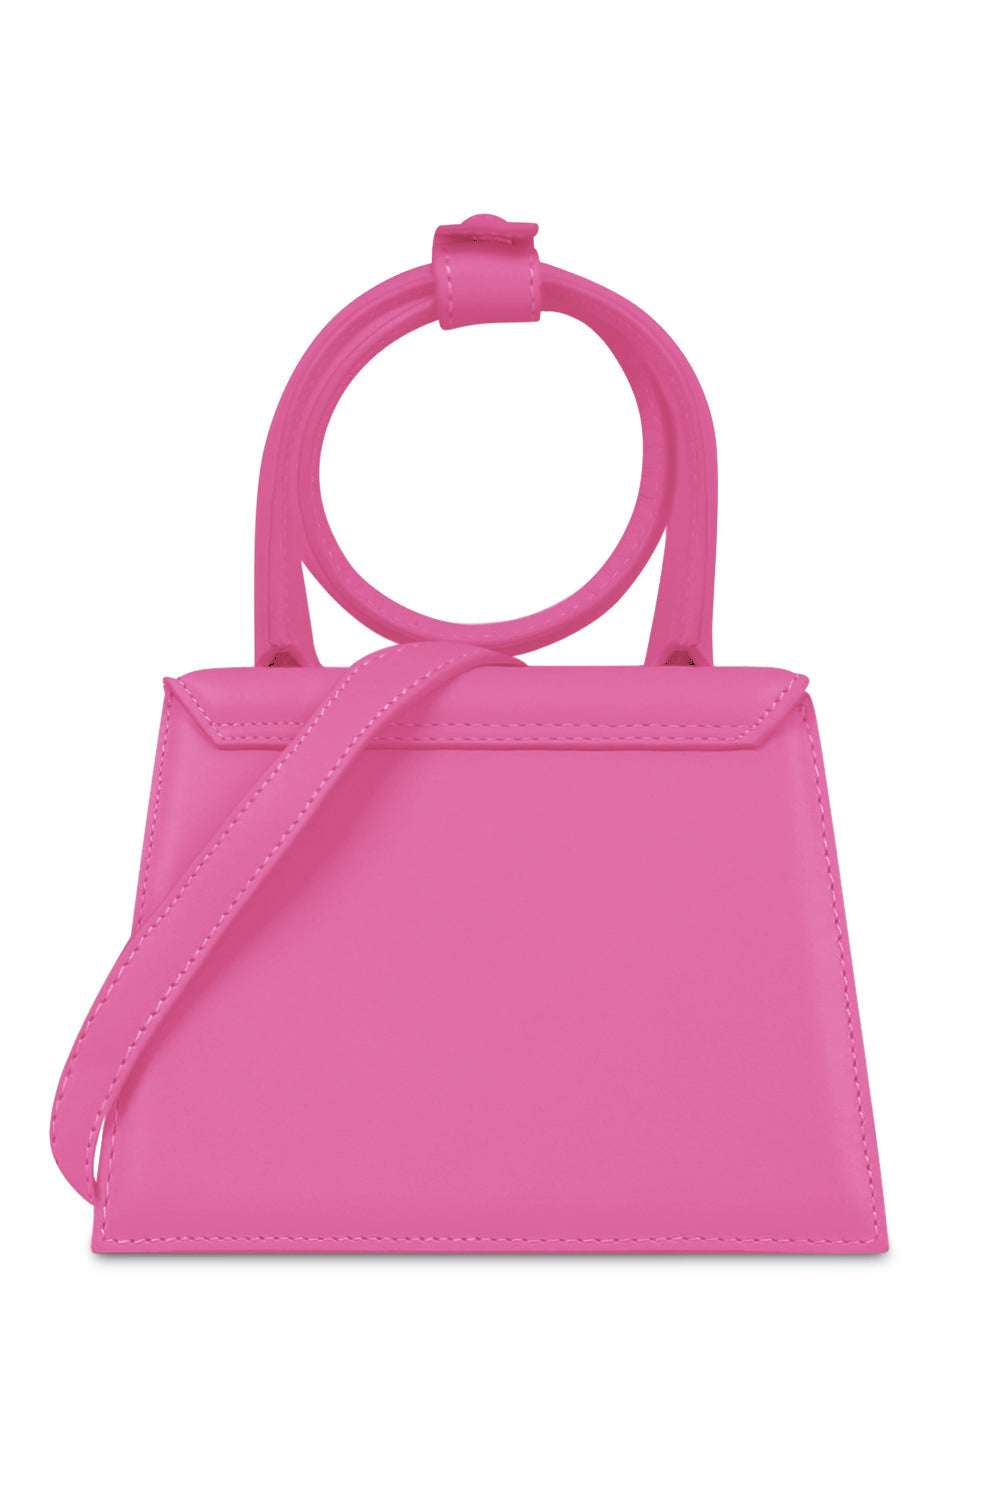 JACQUEMUS BAGS PINK LE CHIQUITO NOEUD BAG | PINK